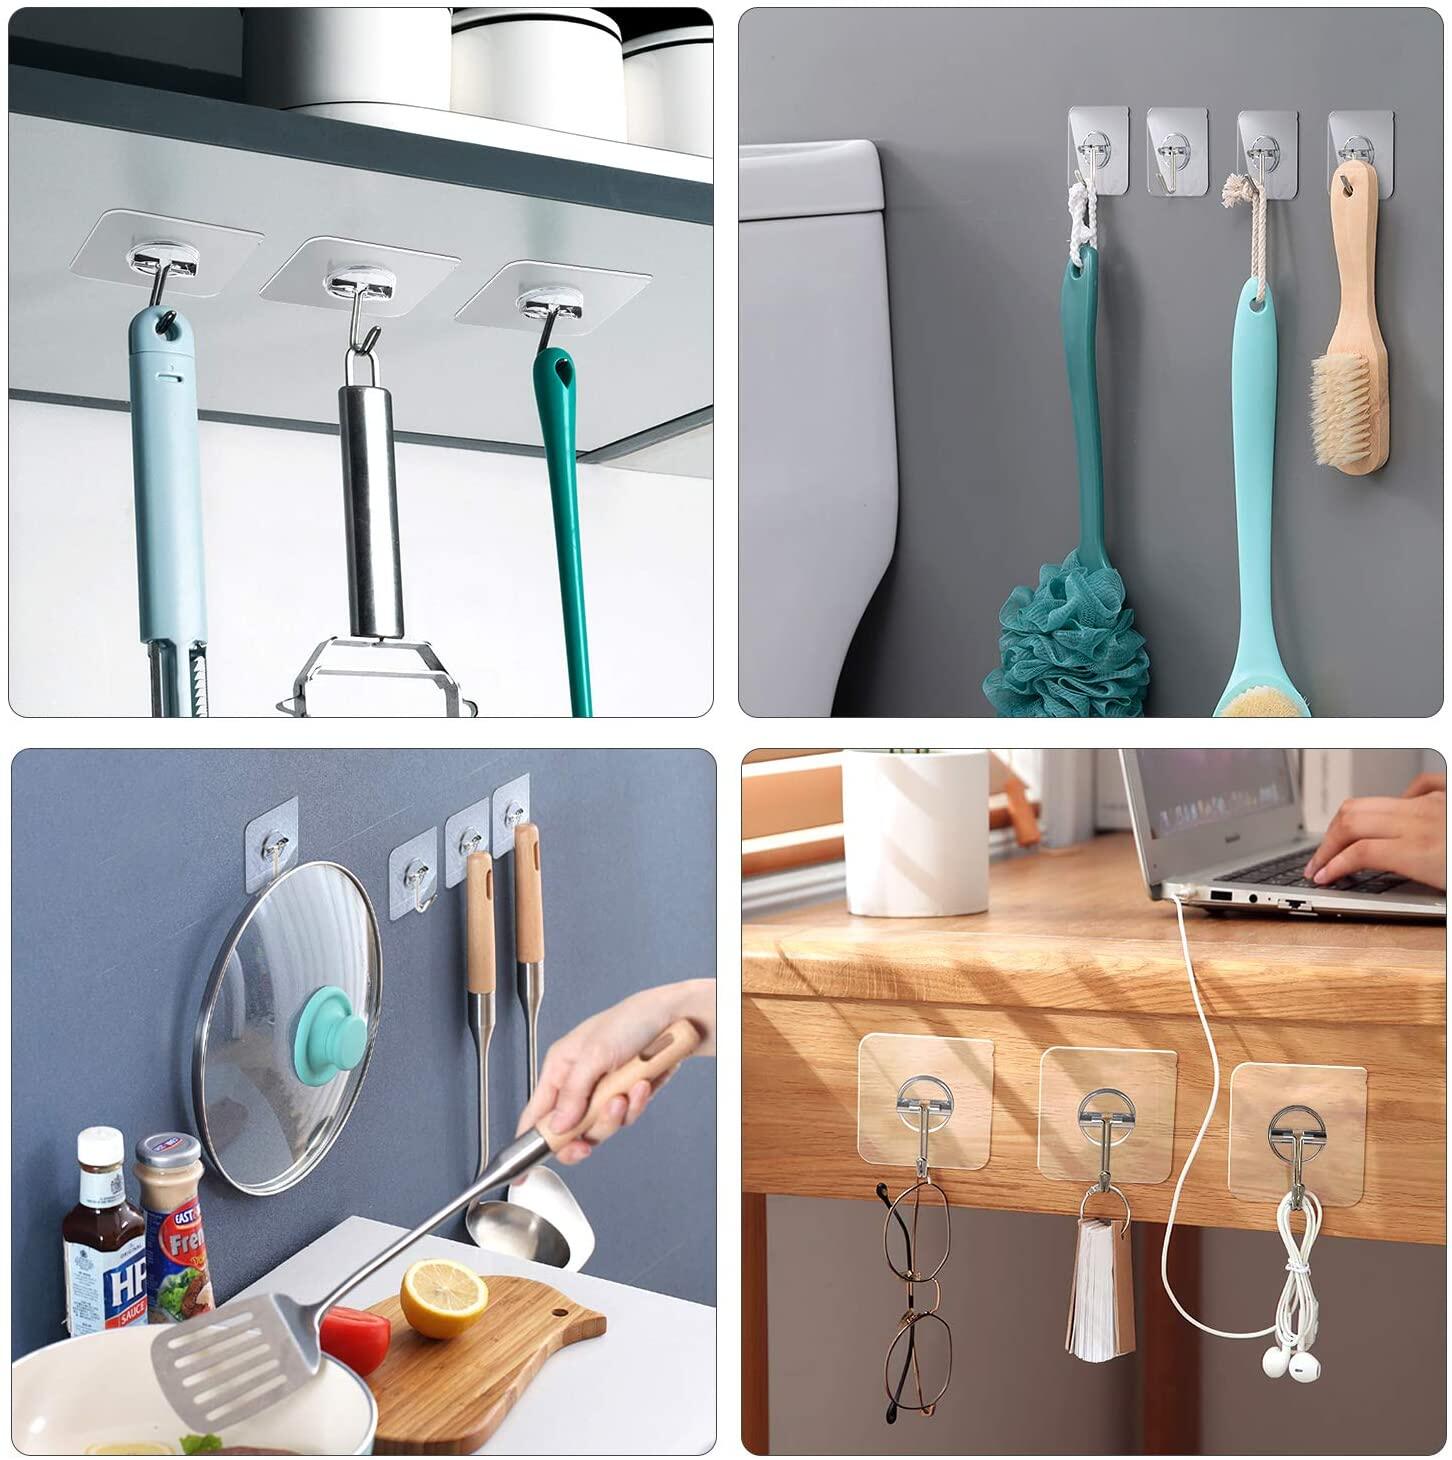 12x Strong Transparent Suction Cup Sucker Wall Hooks Hanger For Kitchen Bathroom 